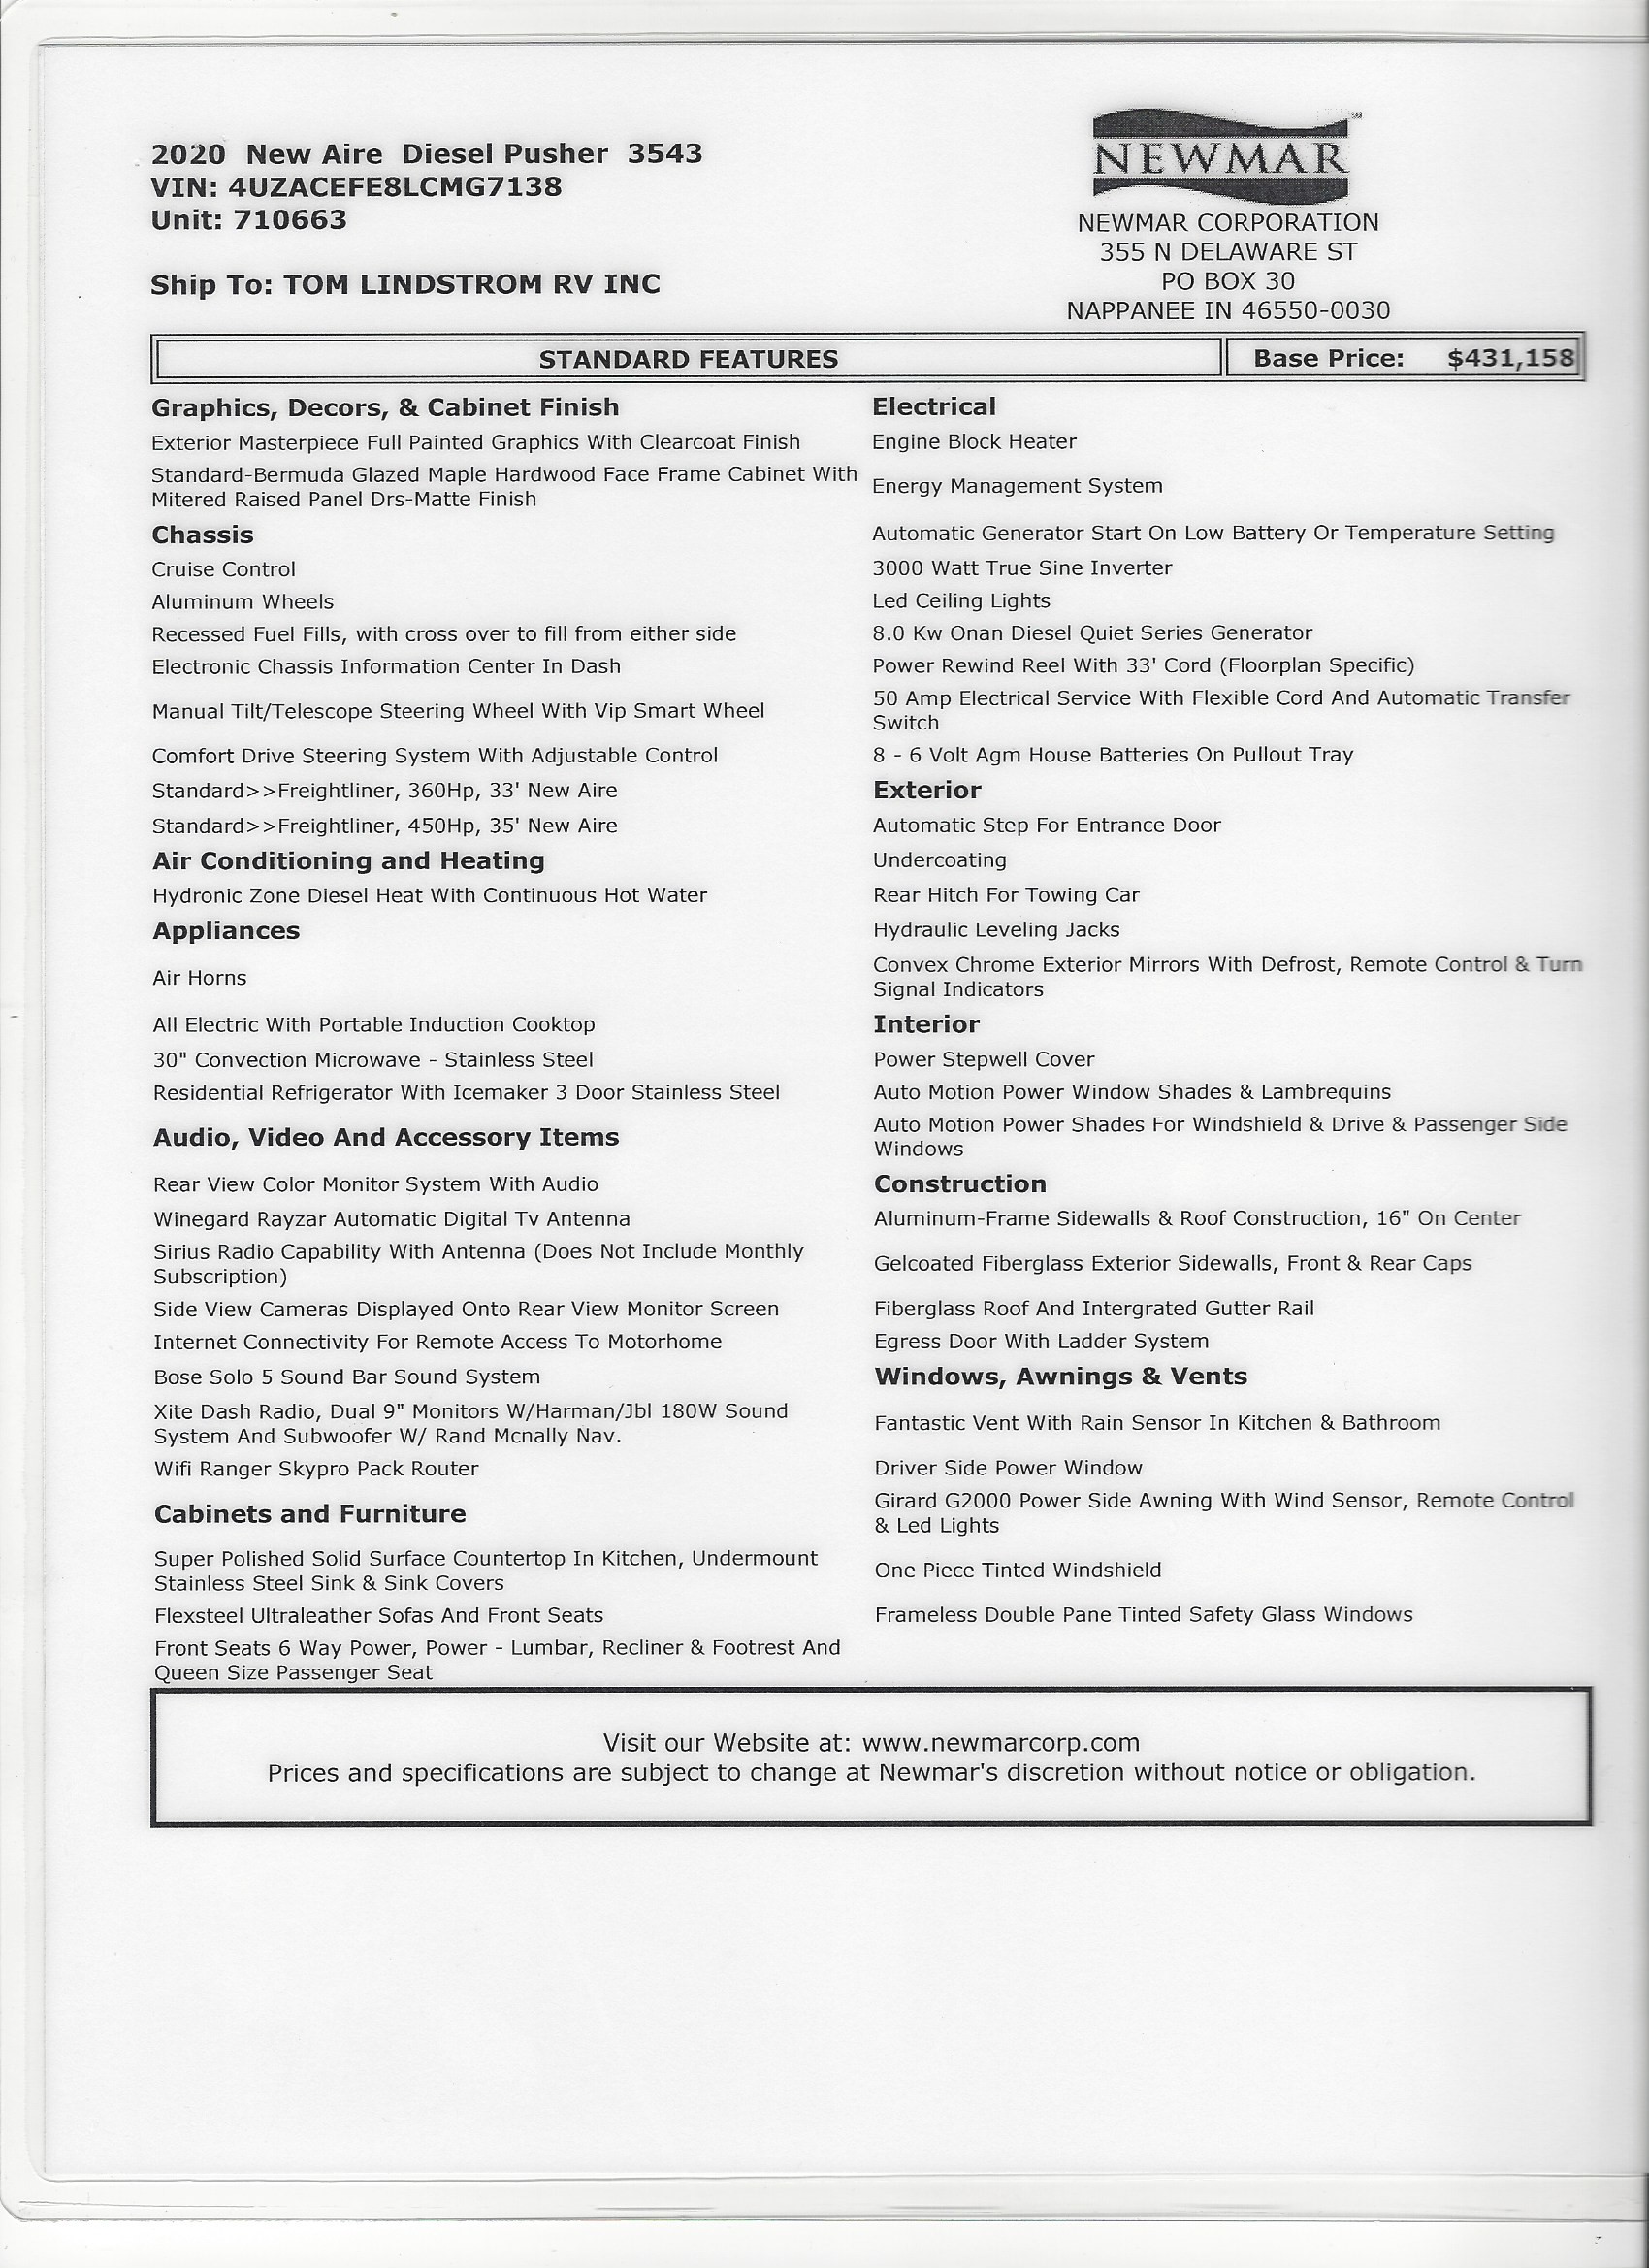 2020 Newmar New Aire 3543 MSRP Sheet